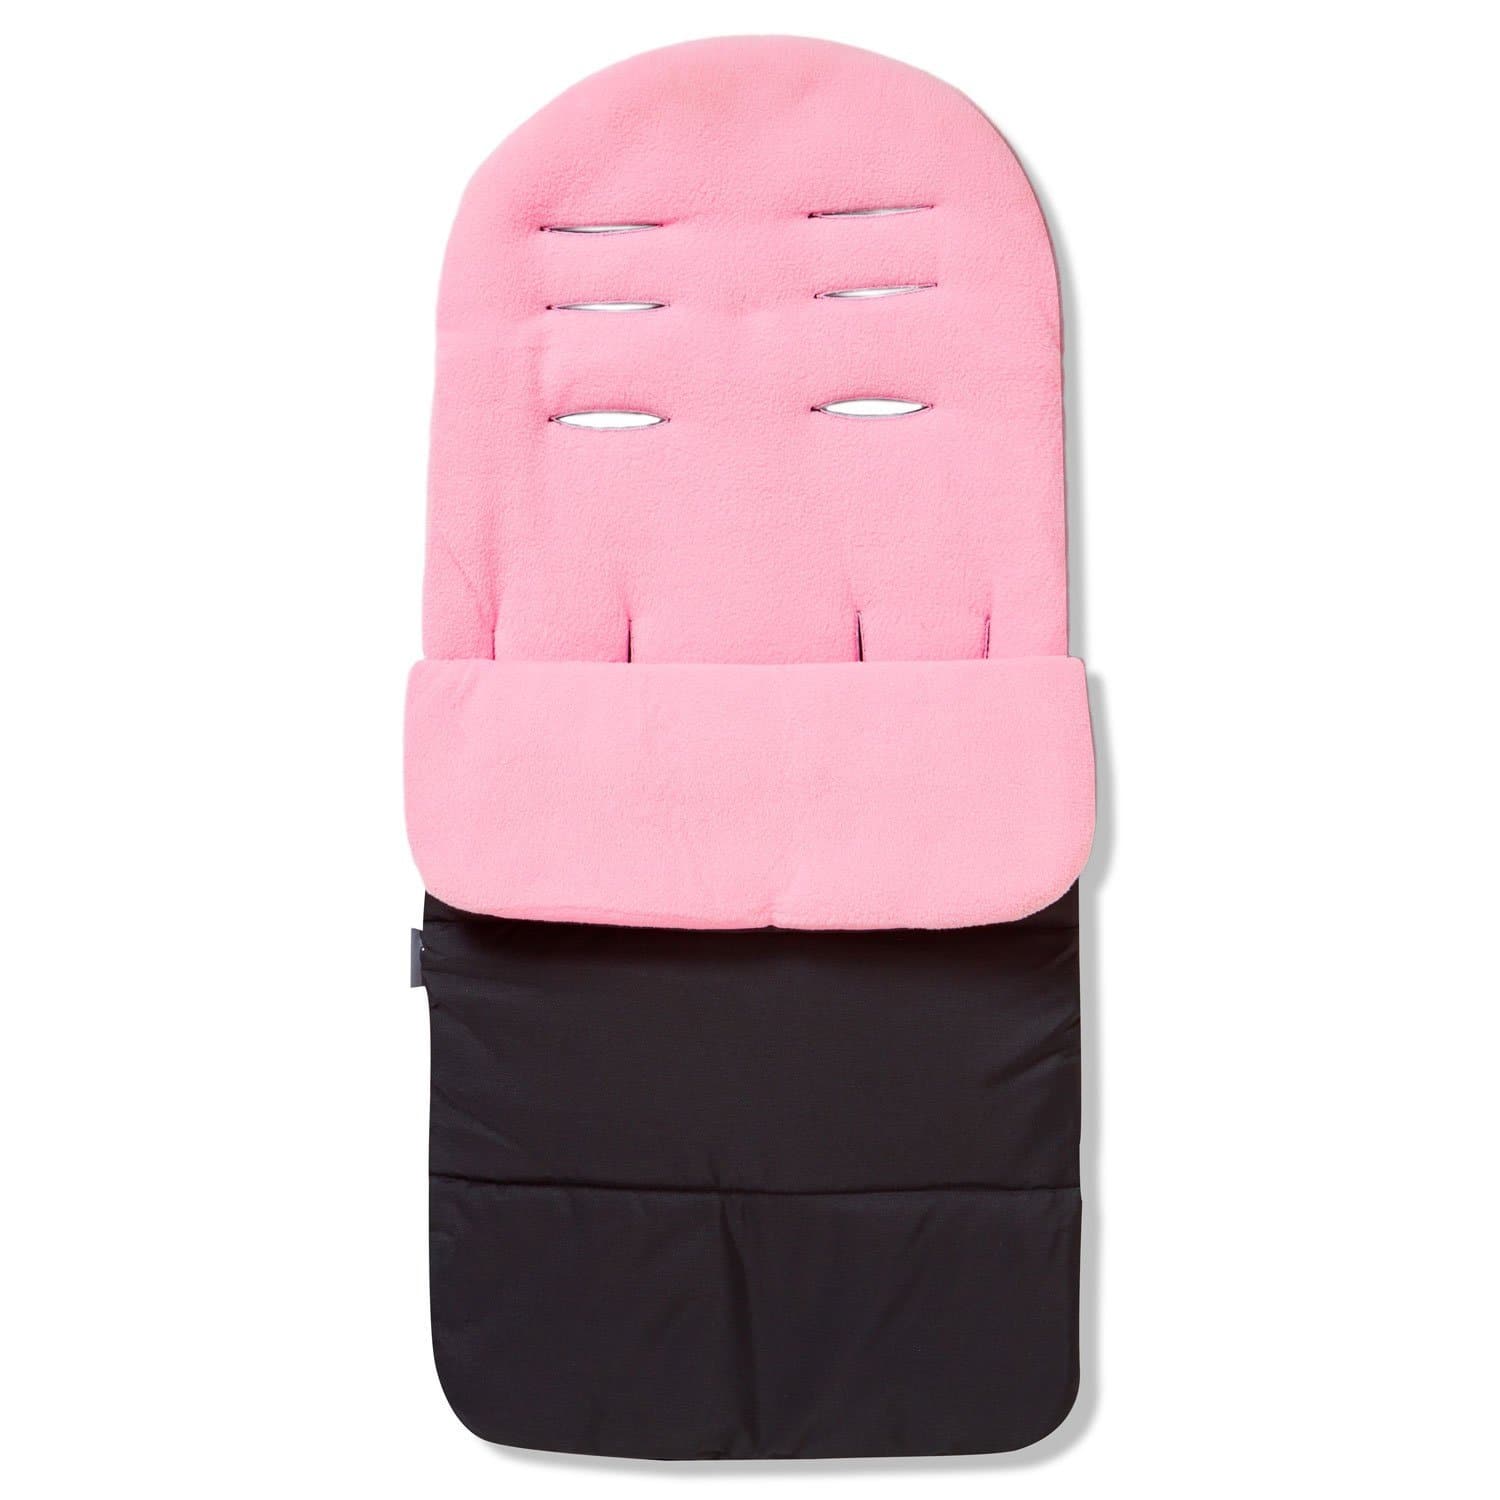 Premium Footmuff / Cosy Toes Compatible with Easywalker - Candy Pink / Fits All Models | For Your Little One